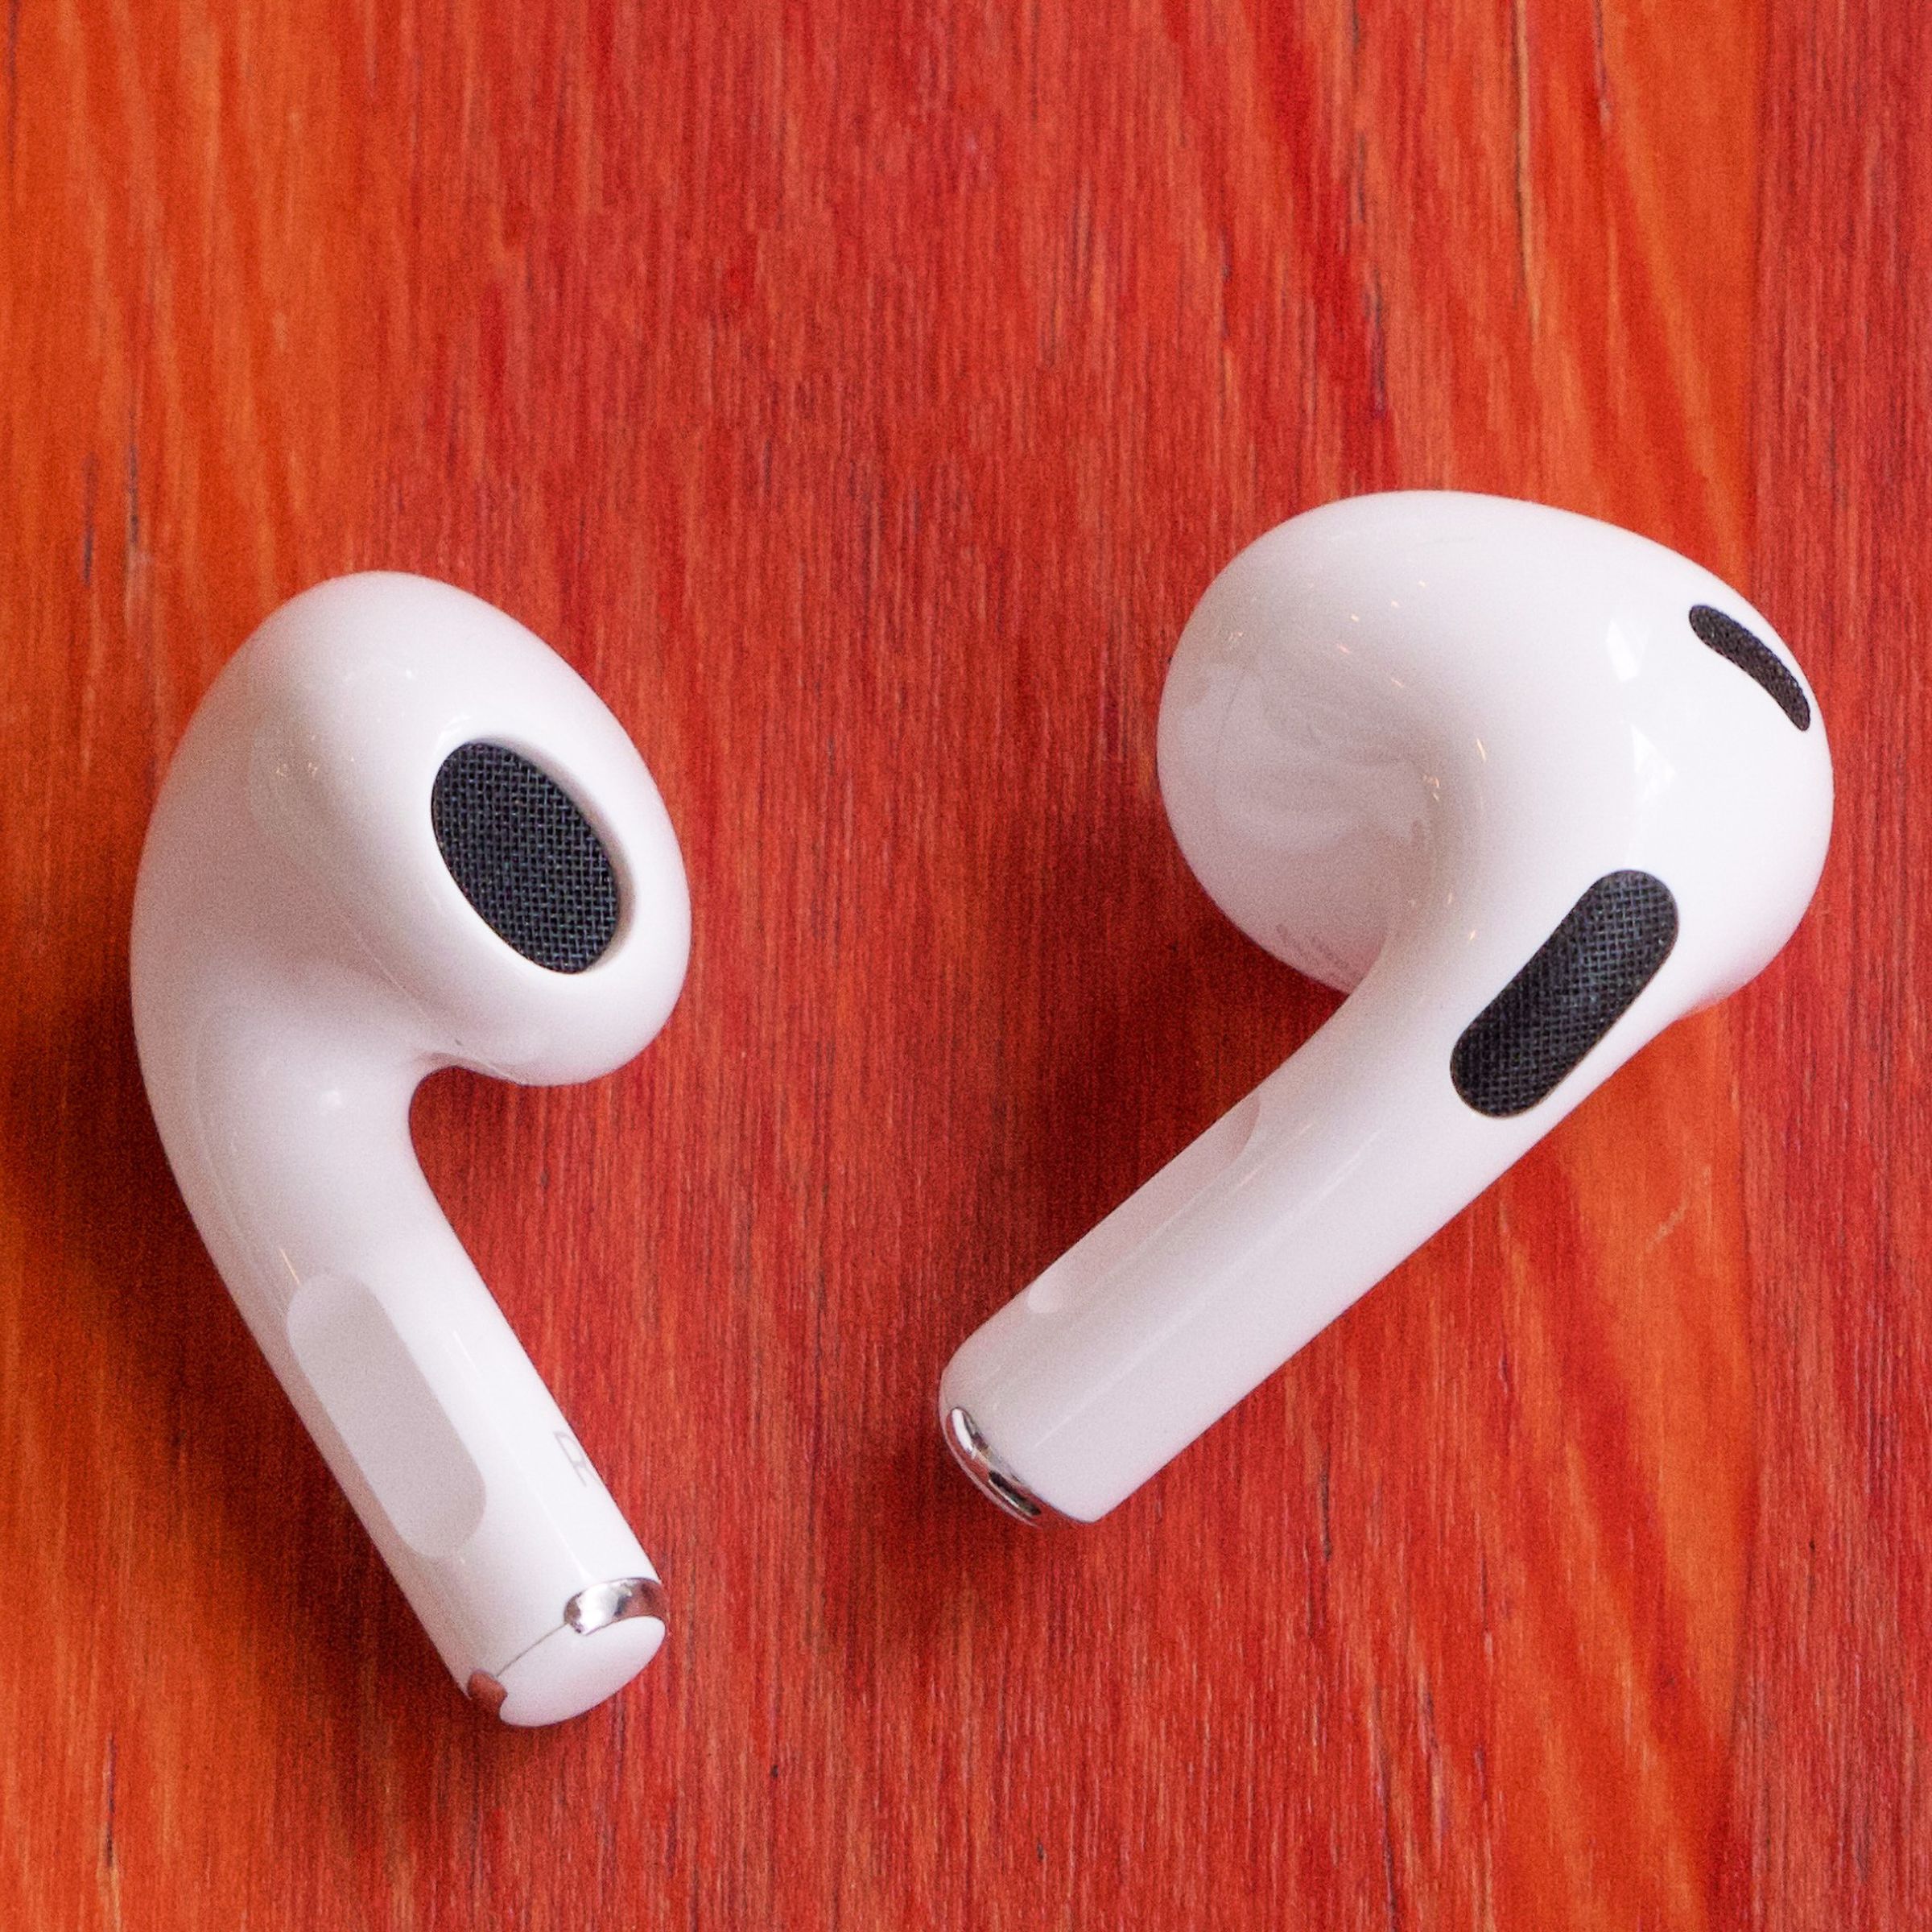 Apple’s third-gen AirPods are on sale for their best of the year